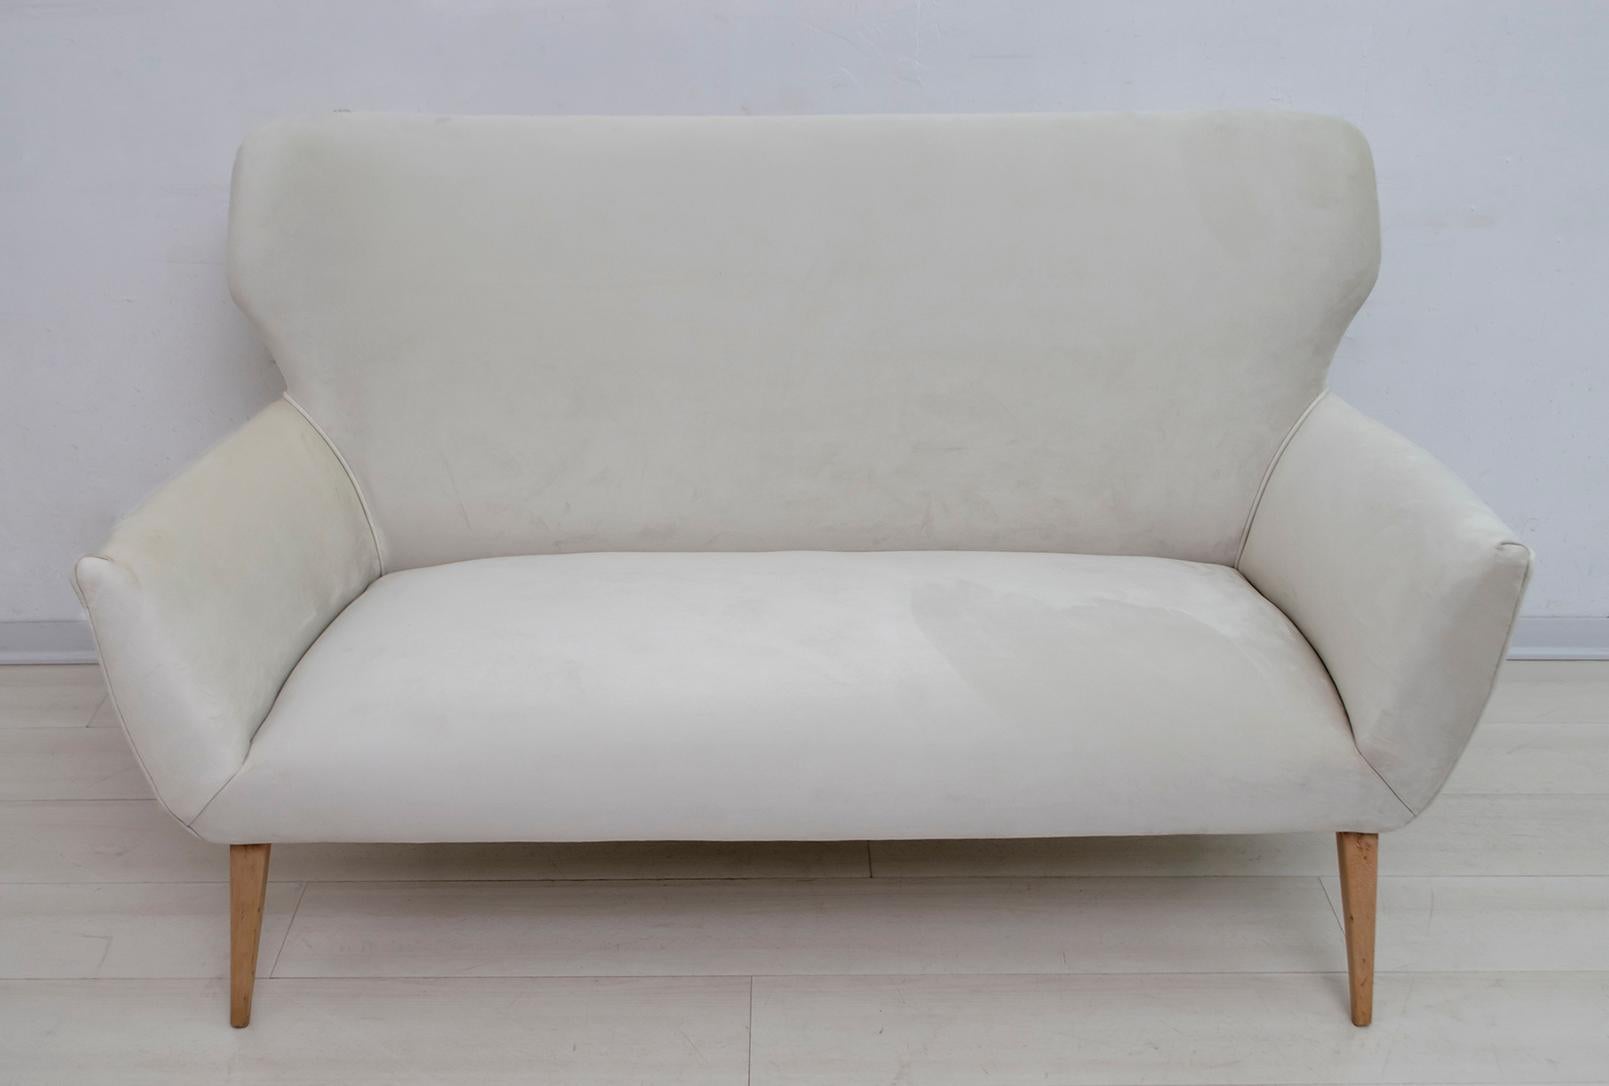 Small sofa in Gio Ponti style Italian production of the 1950s, 
upholstered in cream-colored velvet, feet in natural beech.